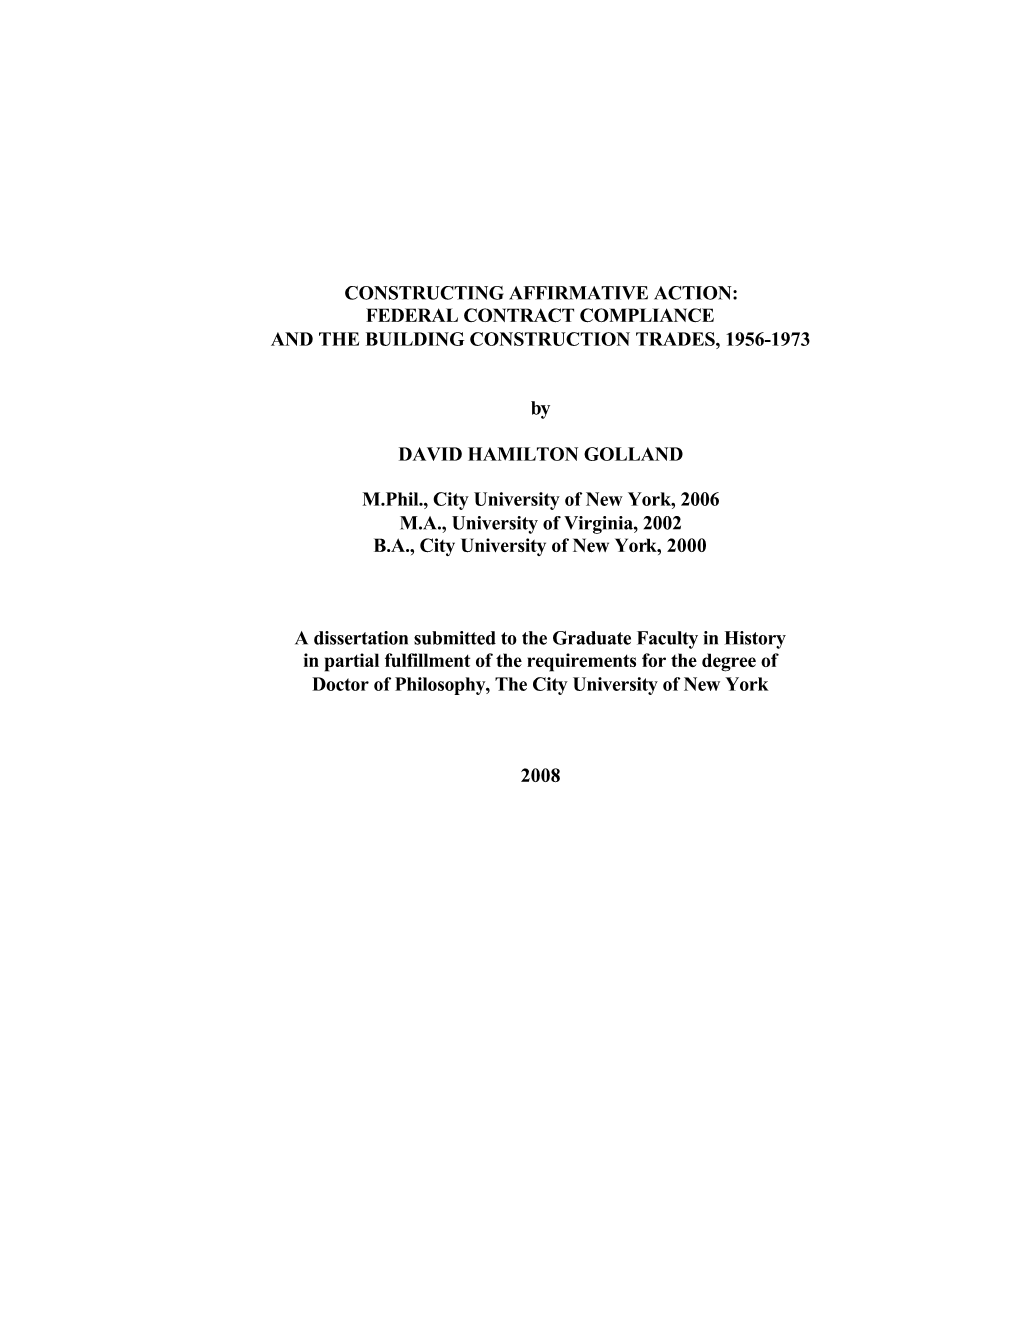 Constructing Affirmative Action: Federal Contract Compliance and the Building Construction Trades, 1956-1973